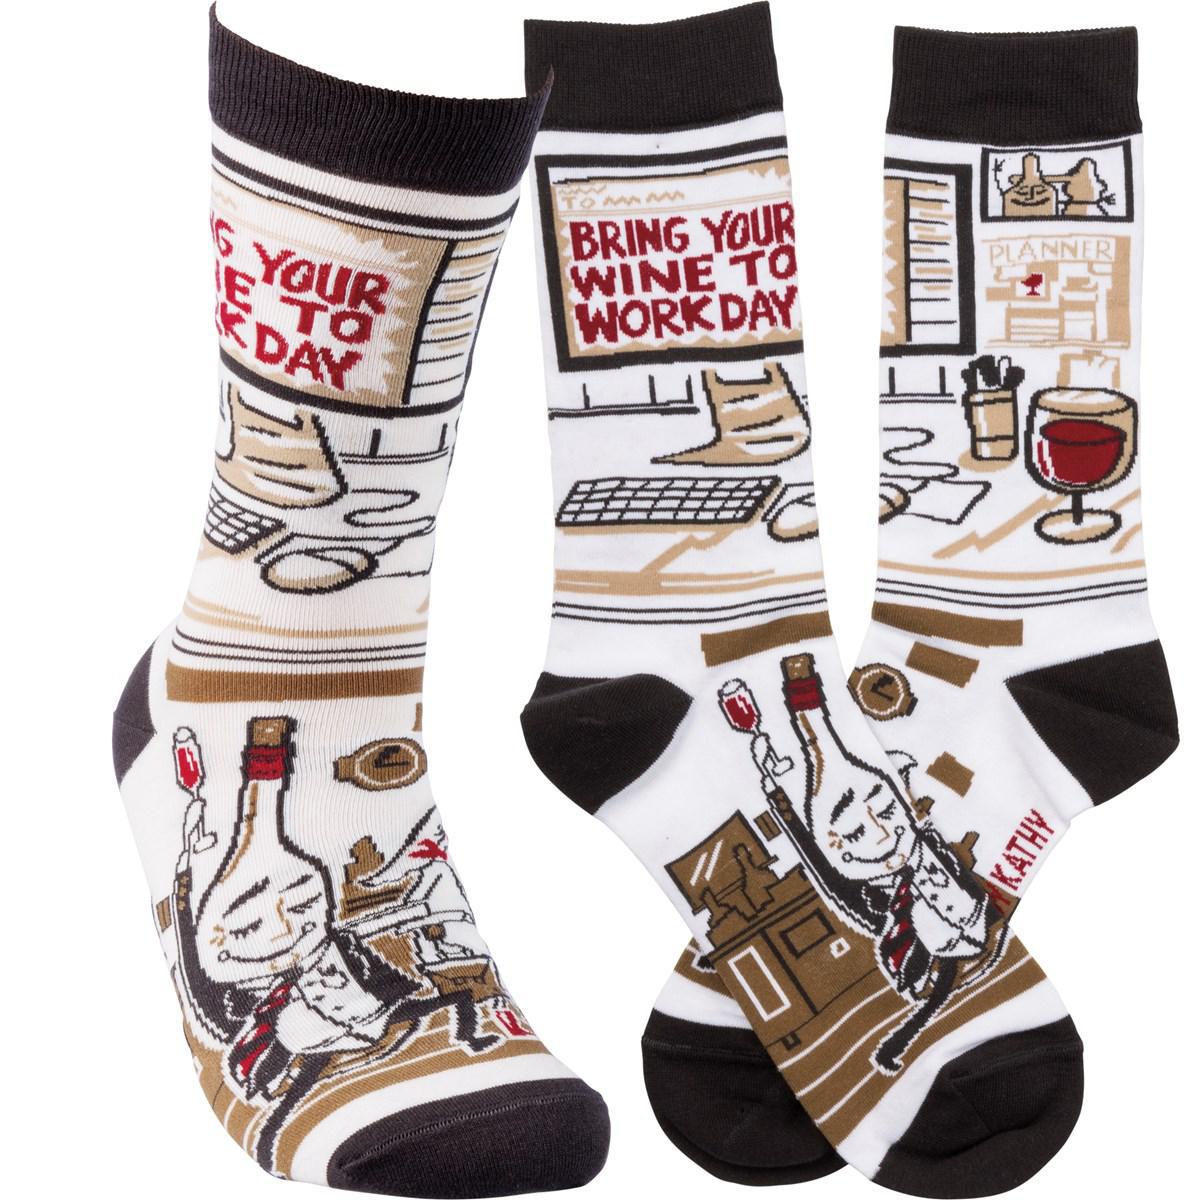 Bring Your Wine To Work Day Socks